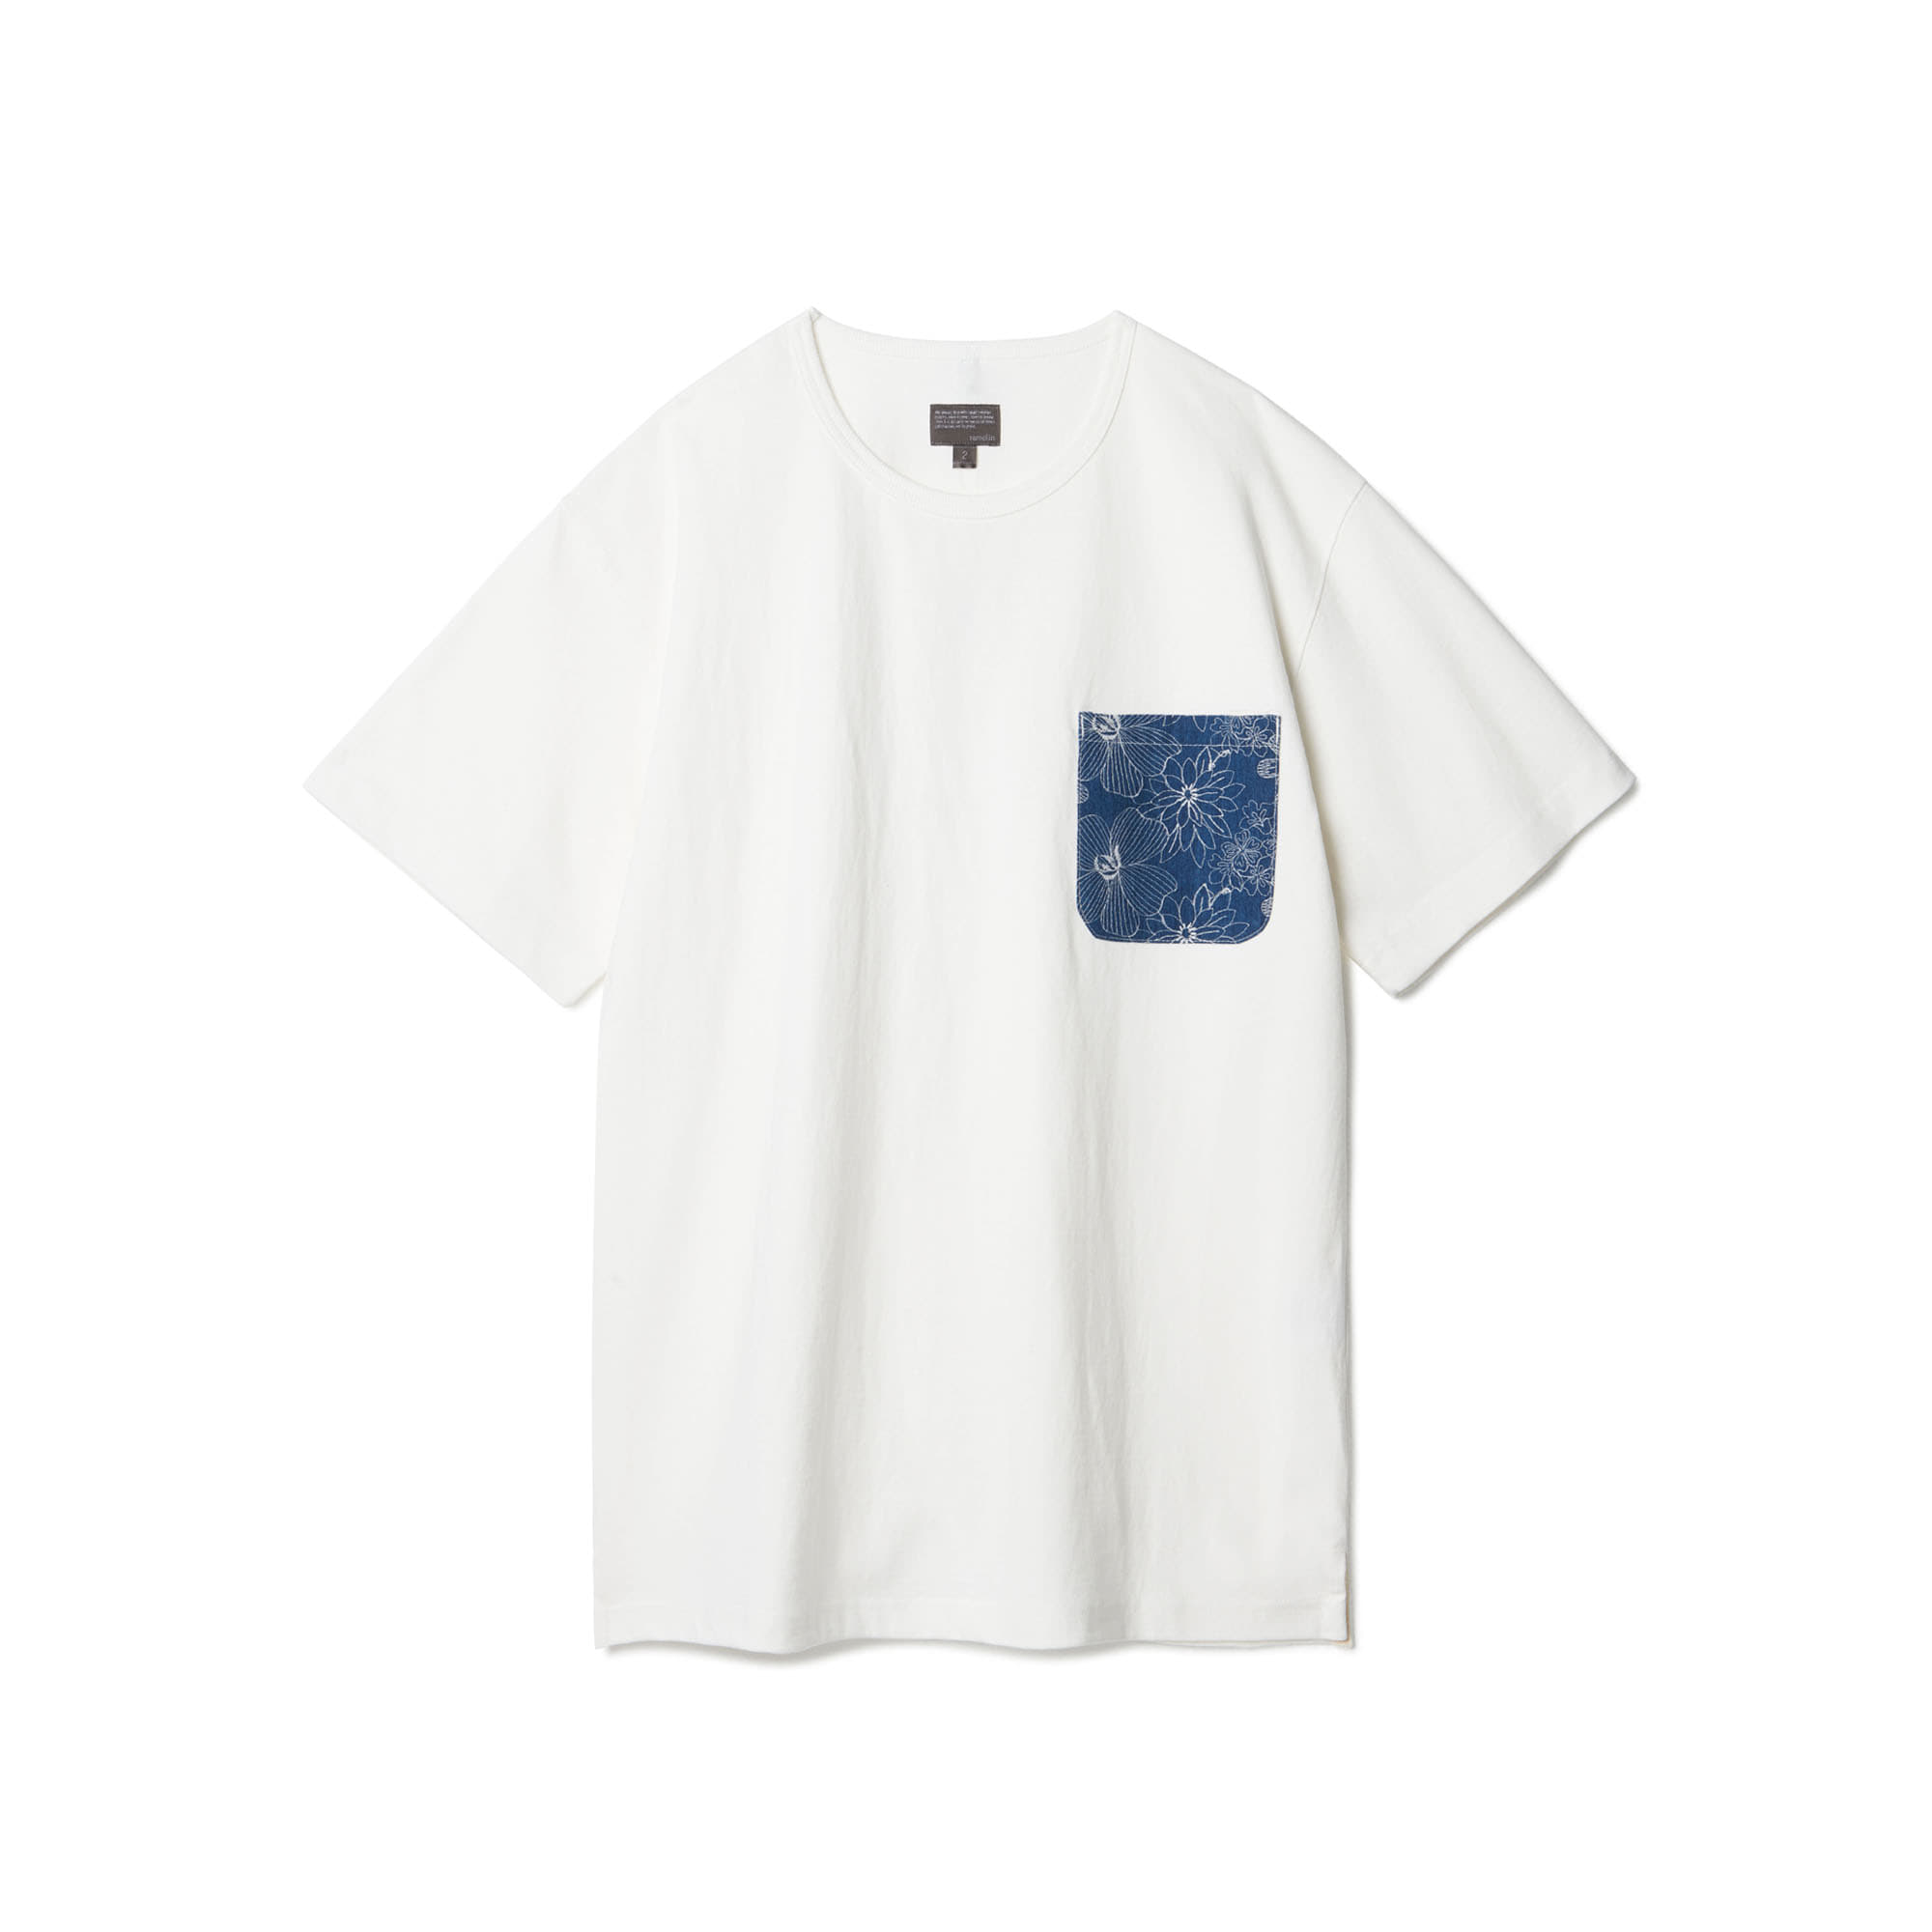 [Restock] Flower Embroidery Pocket T-shirts White